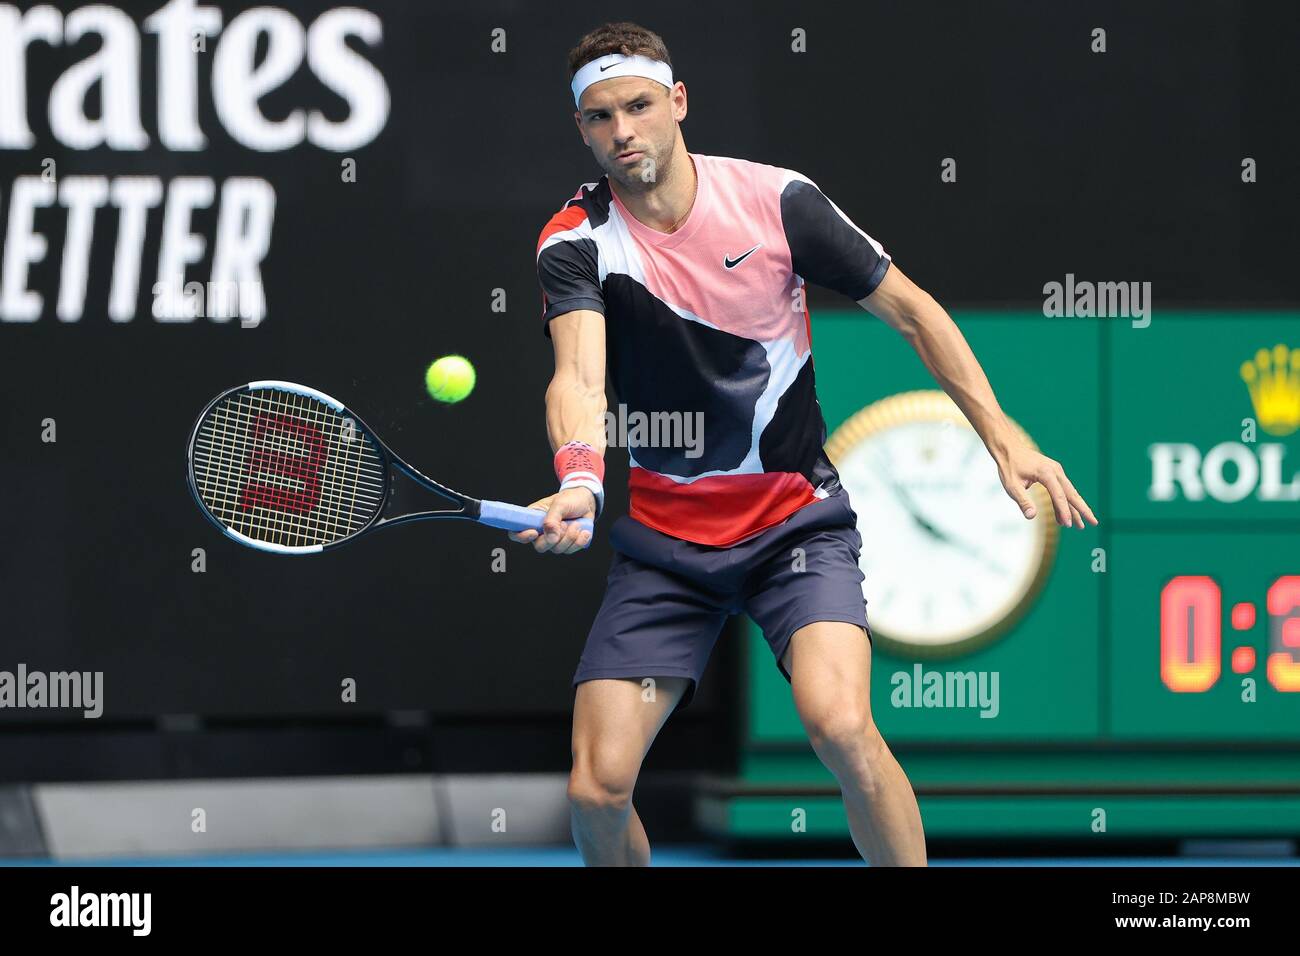 Melbourne, Australia. 22nd Jan, 2019. Grigor Dimitrov of Bulgaria plays a forehand during the round match against Tommy Paul of USA during the second round match at the ATP Australian Open